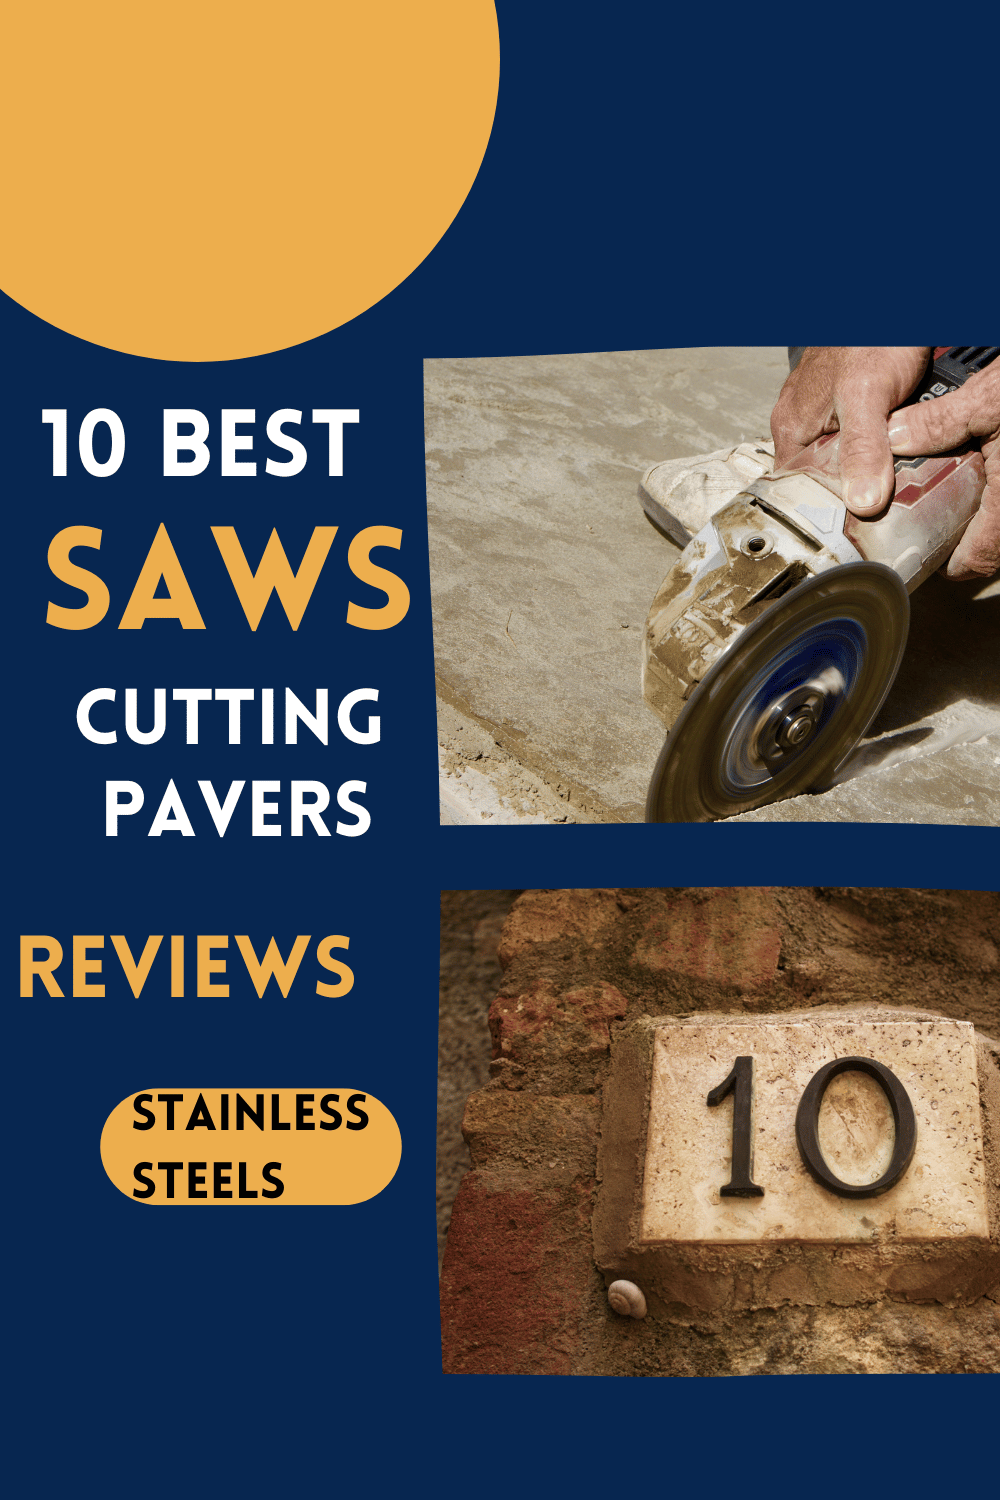 10 Best Saws for Cutting Pavers (Reviews)